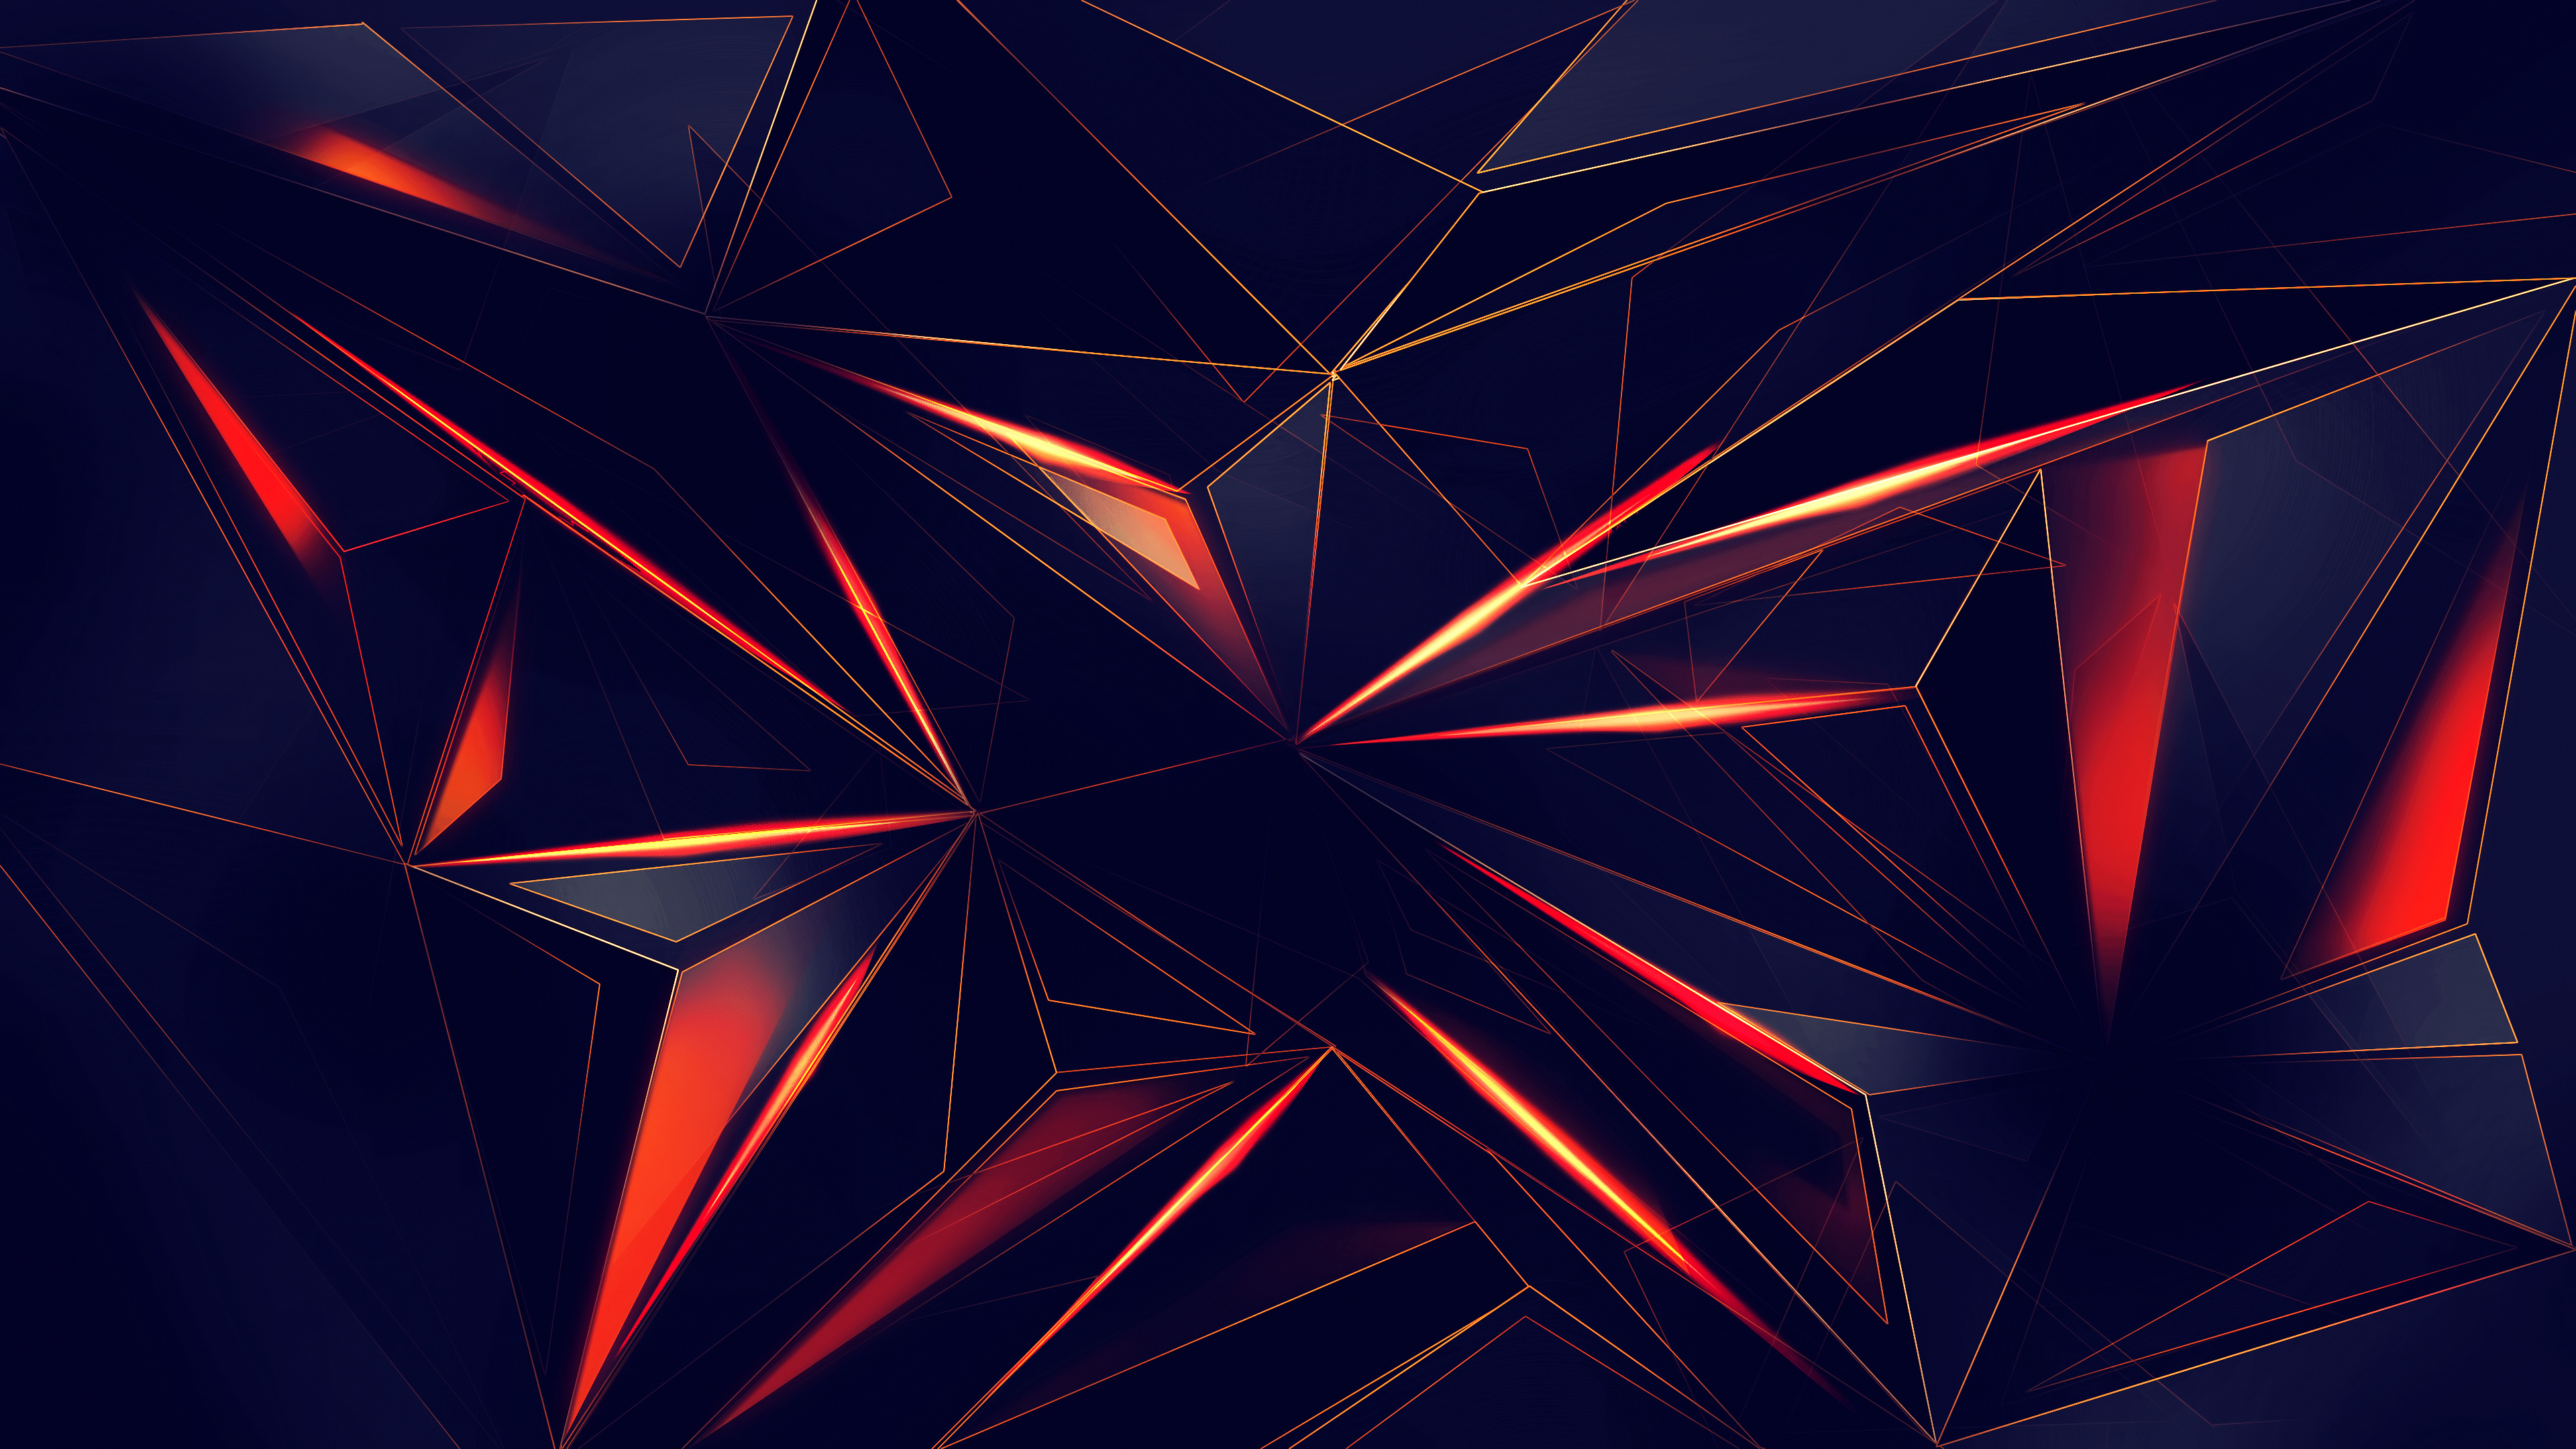 4k geometric wallpaper, Posted by Ryan Tremblay, Other subject, Other subject, 3840x2160 4K Desktop